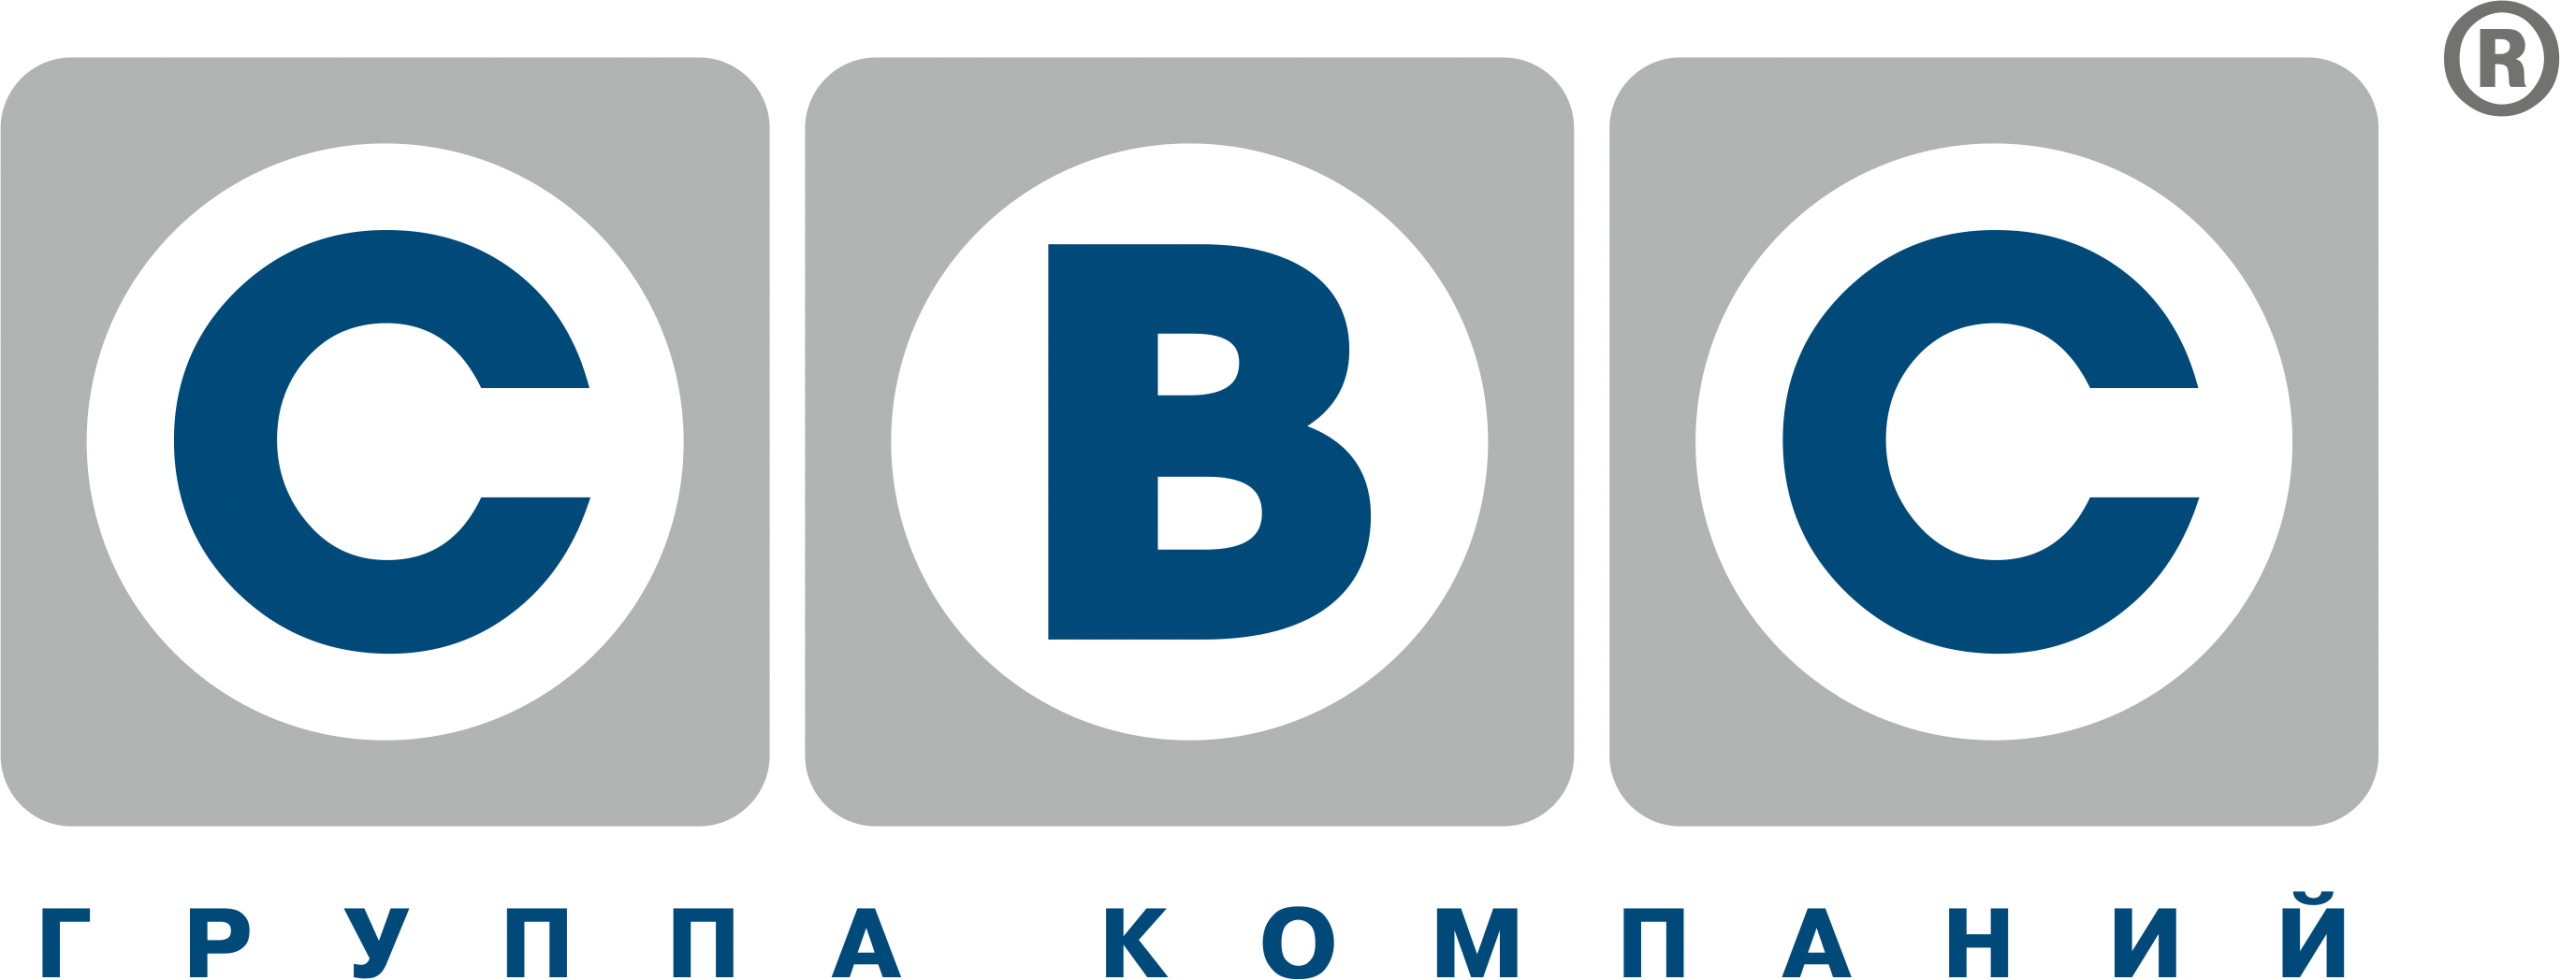 CBC logo PNG.png